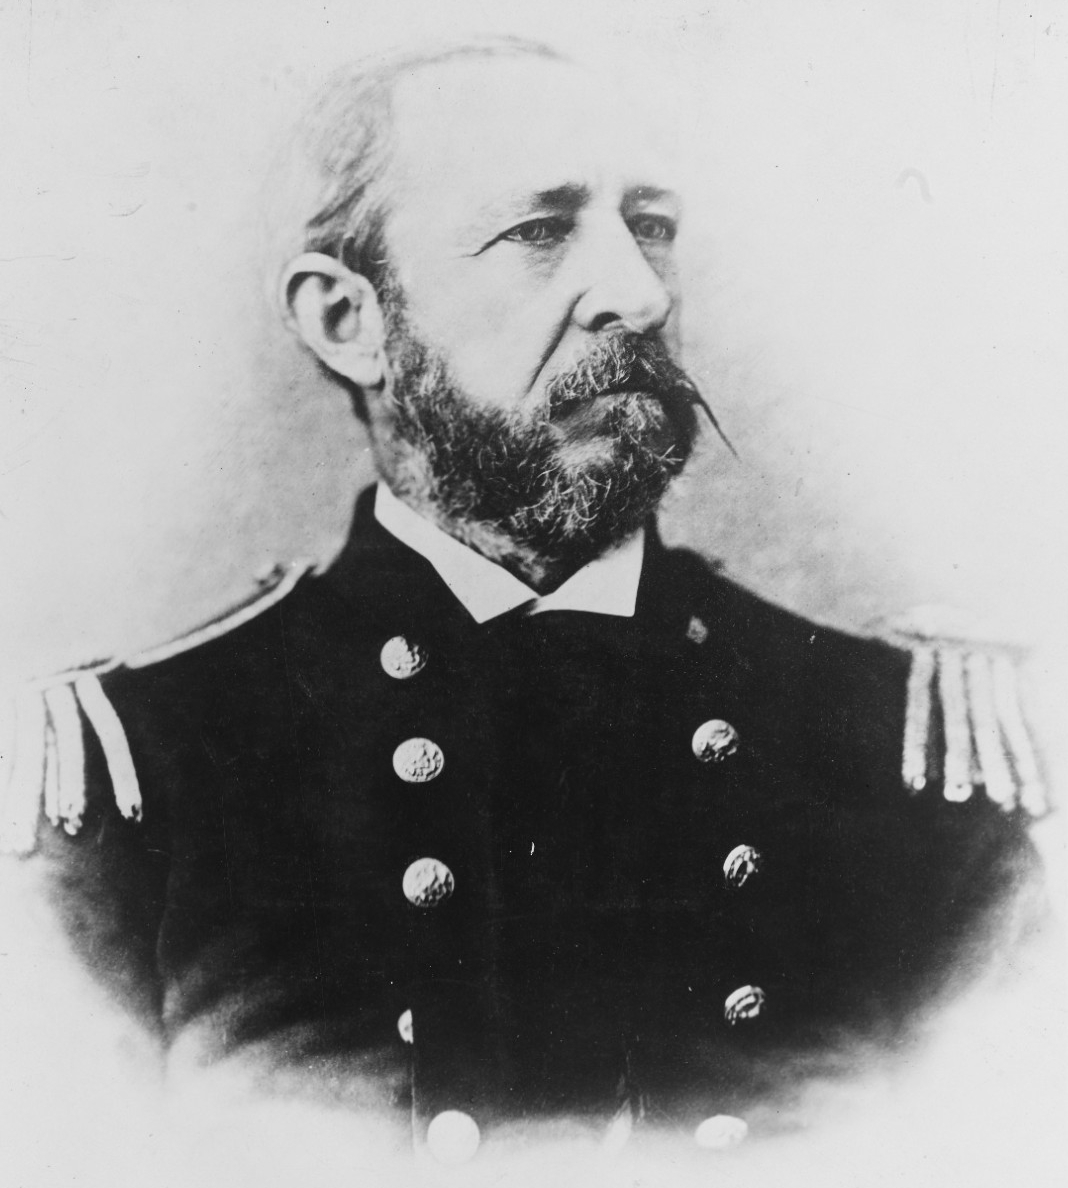 Rear Adm. Daniel Ammen, USN. (Naval History and Heritage Command Photograph NH 177)